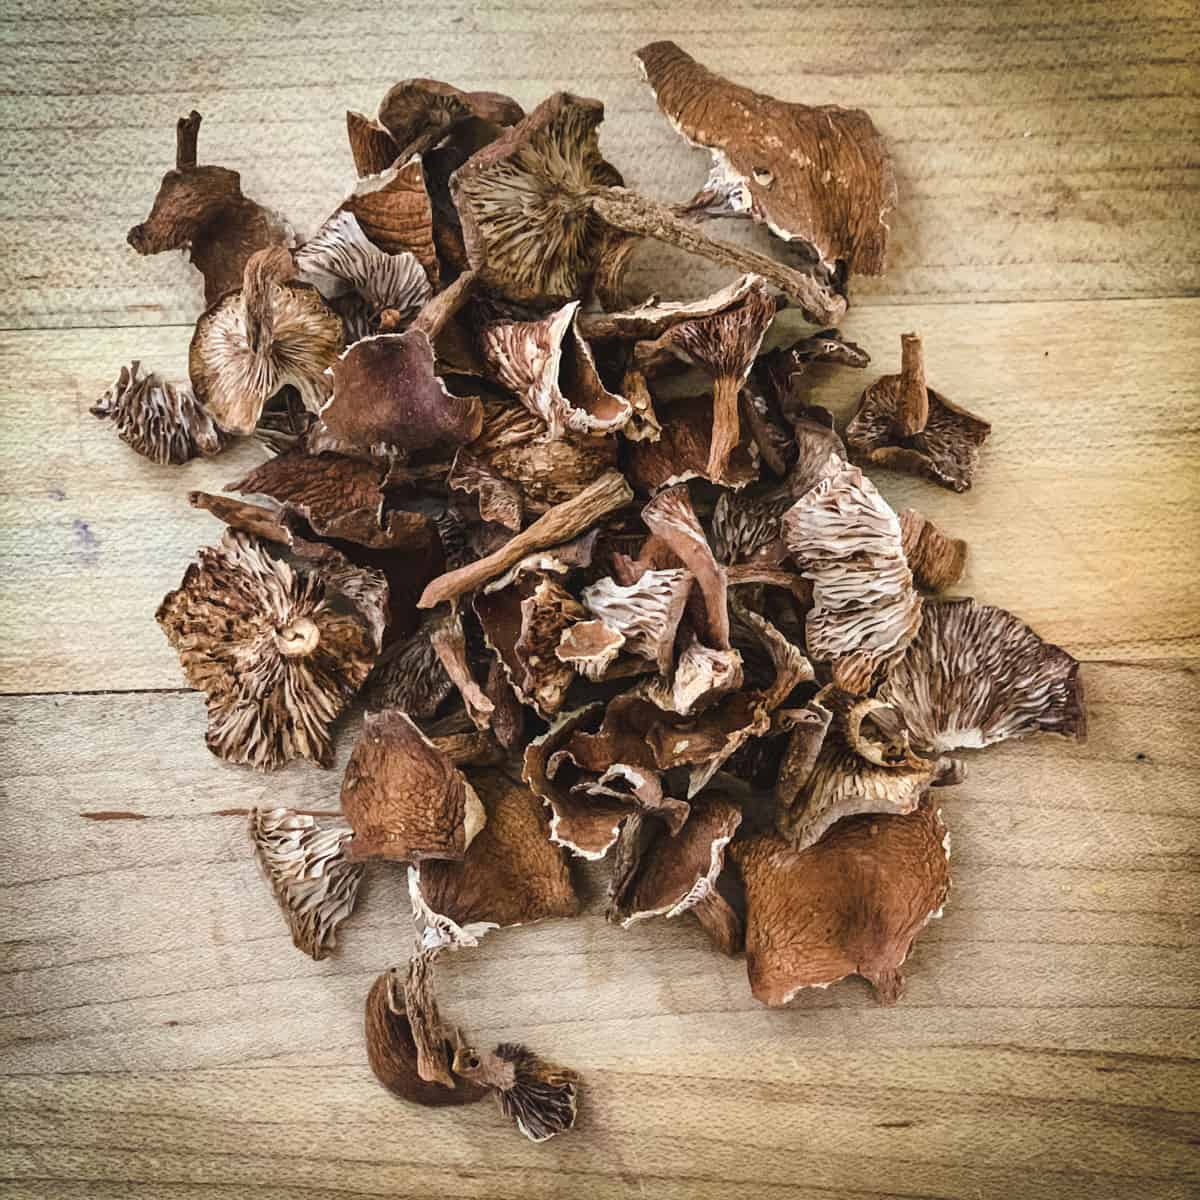 dried candy cap mushrooms on a wooden cutting board